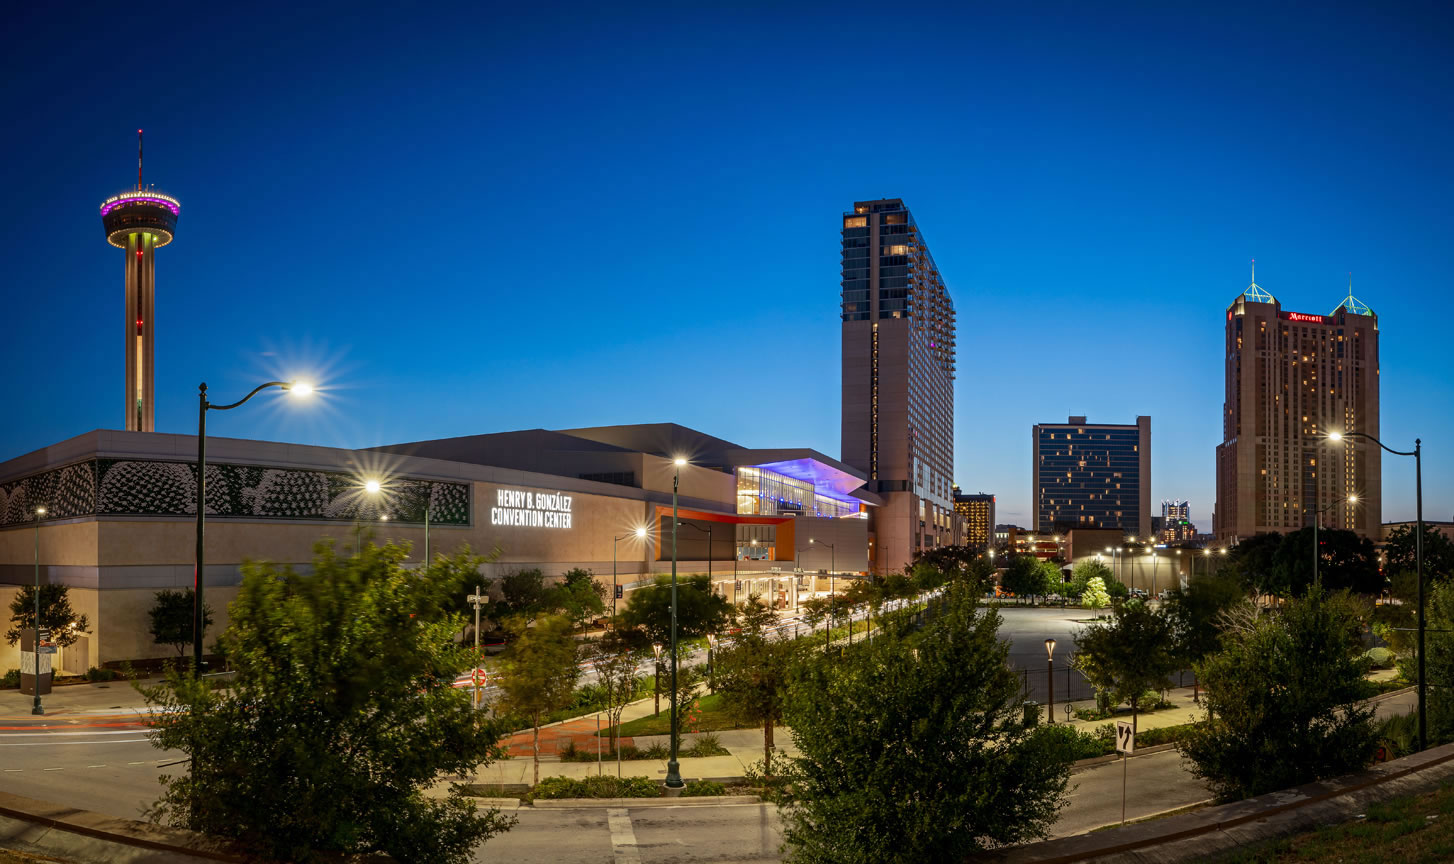 The Henry B. Gonzales Convention Center at night.